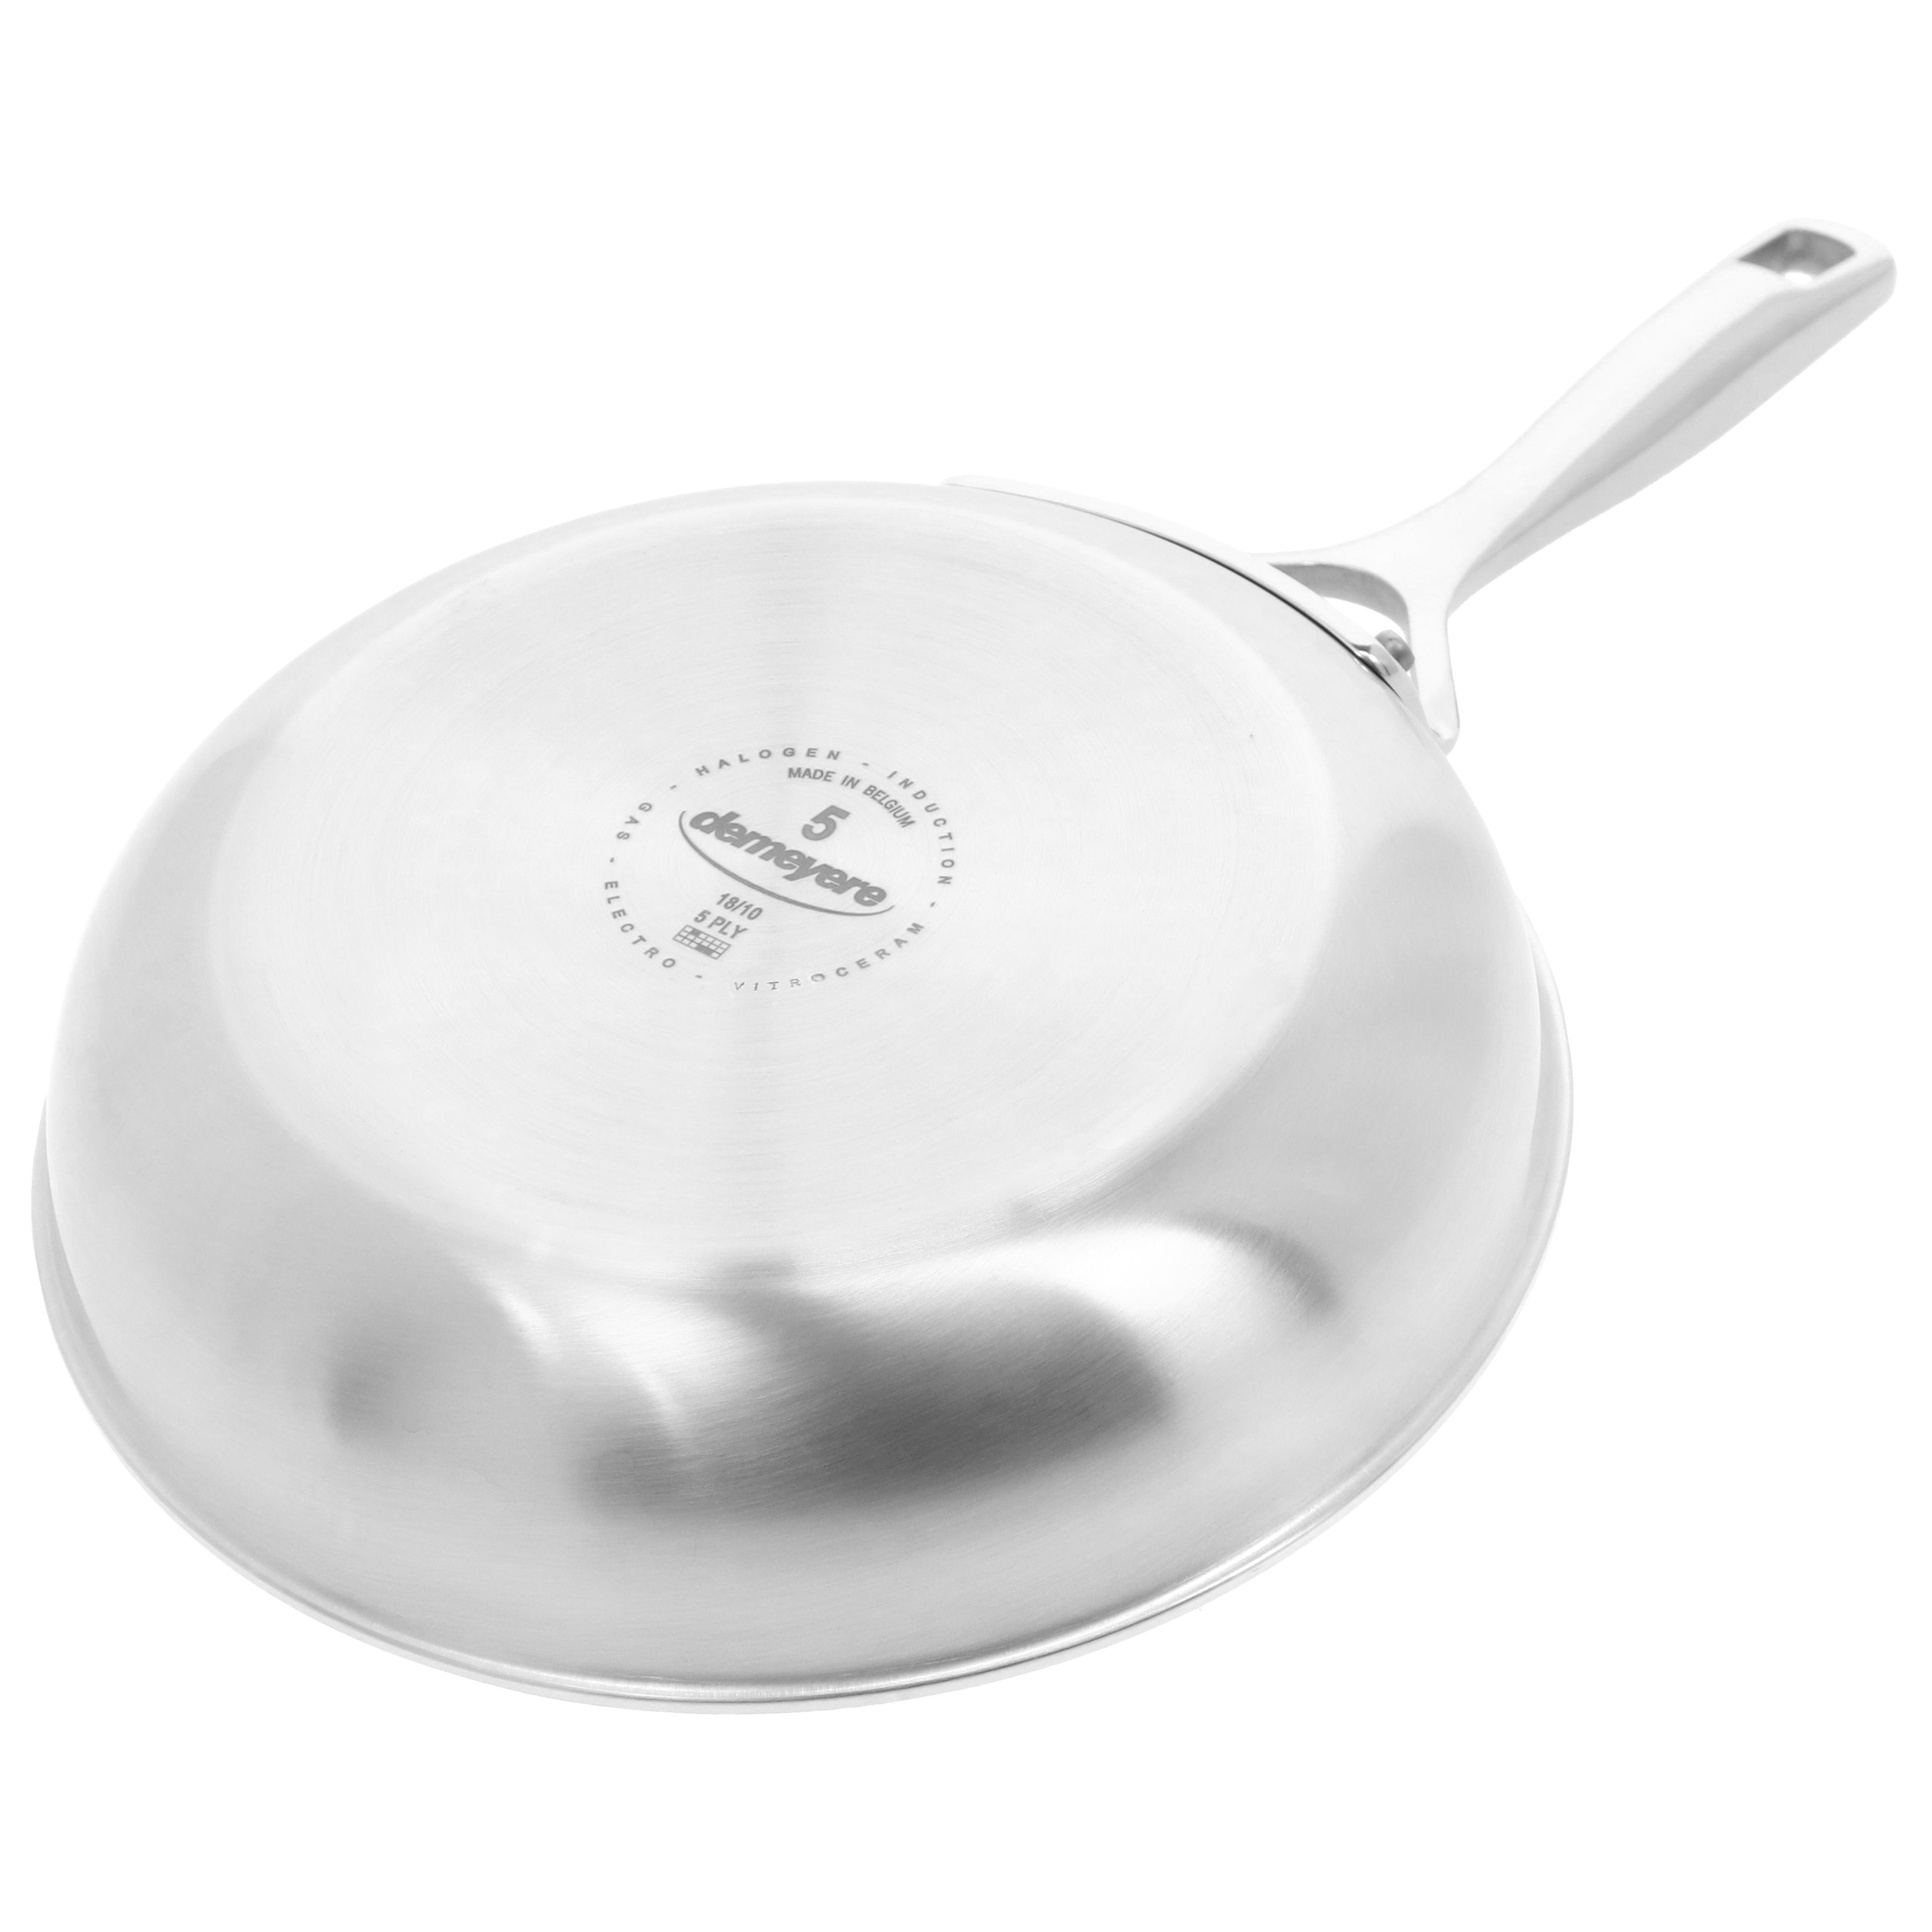 Demeyere Frying Pan 11 with Lid - Stainless Steel 5-Ply Skillet